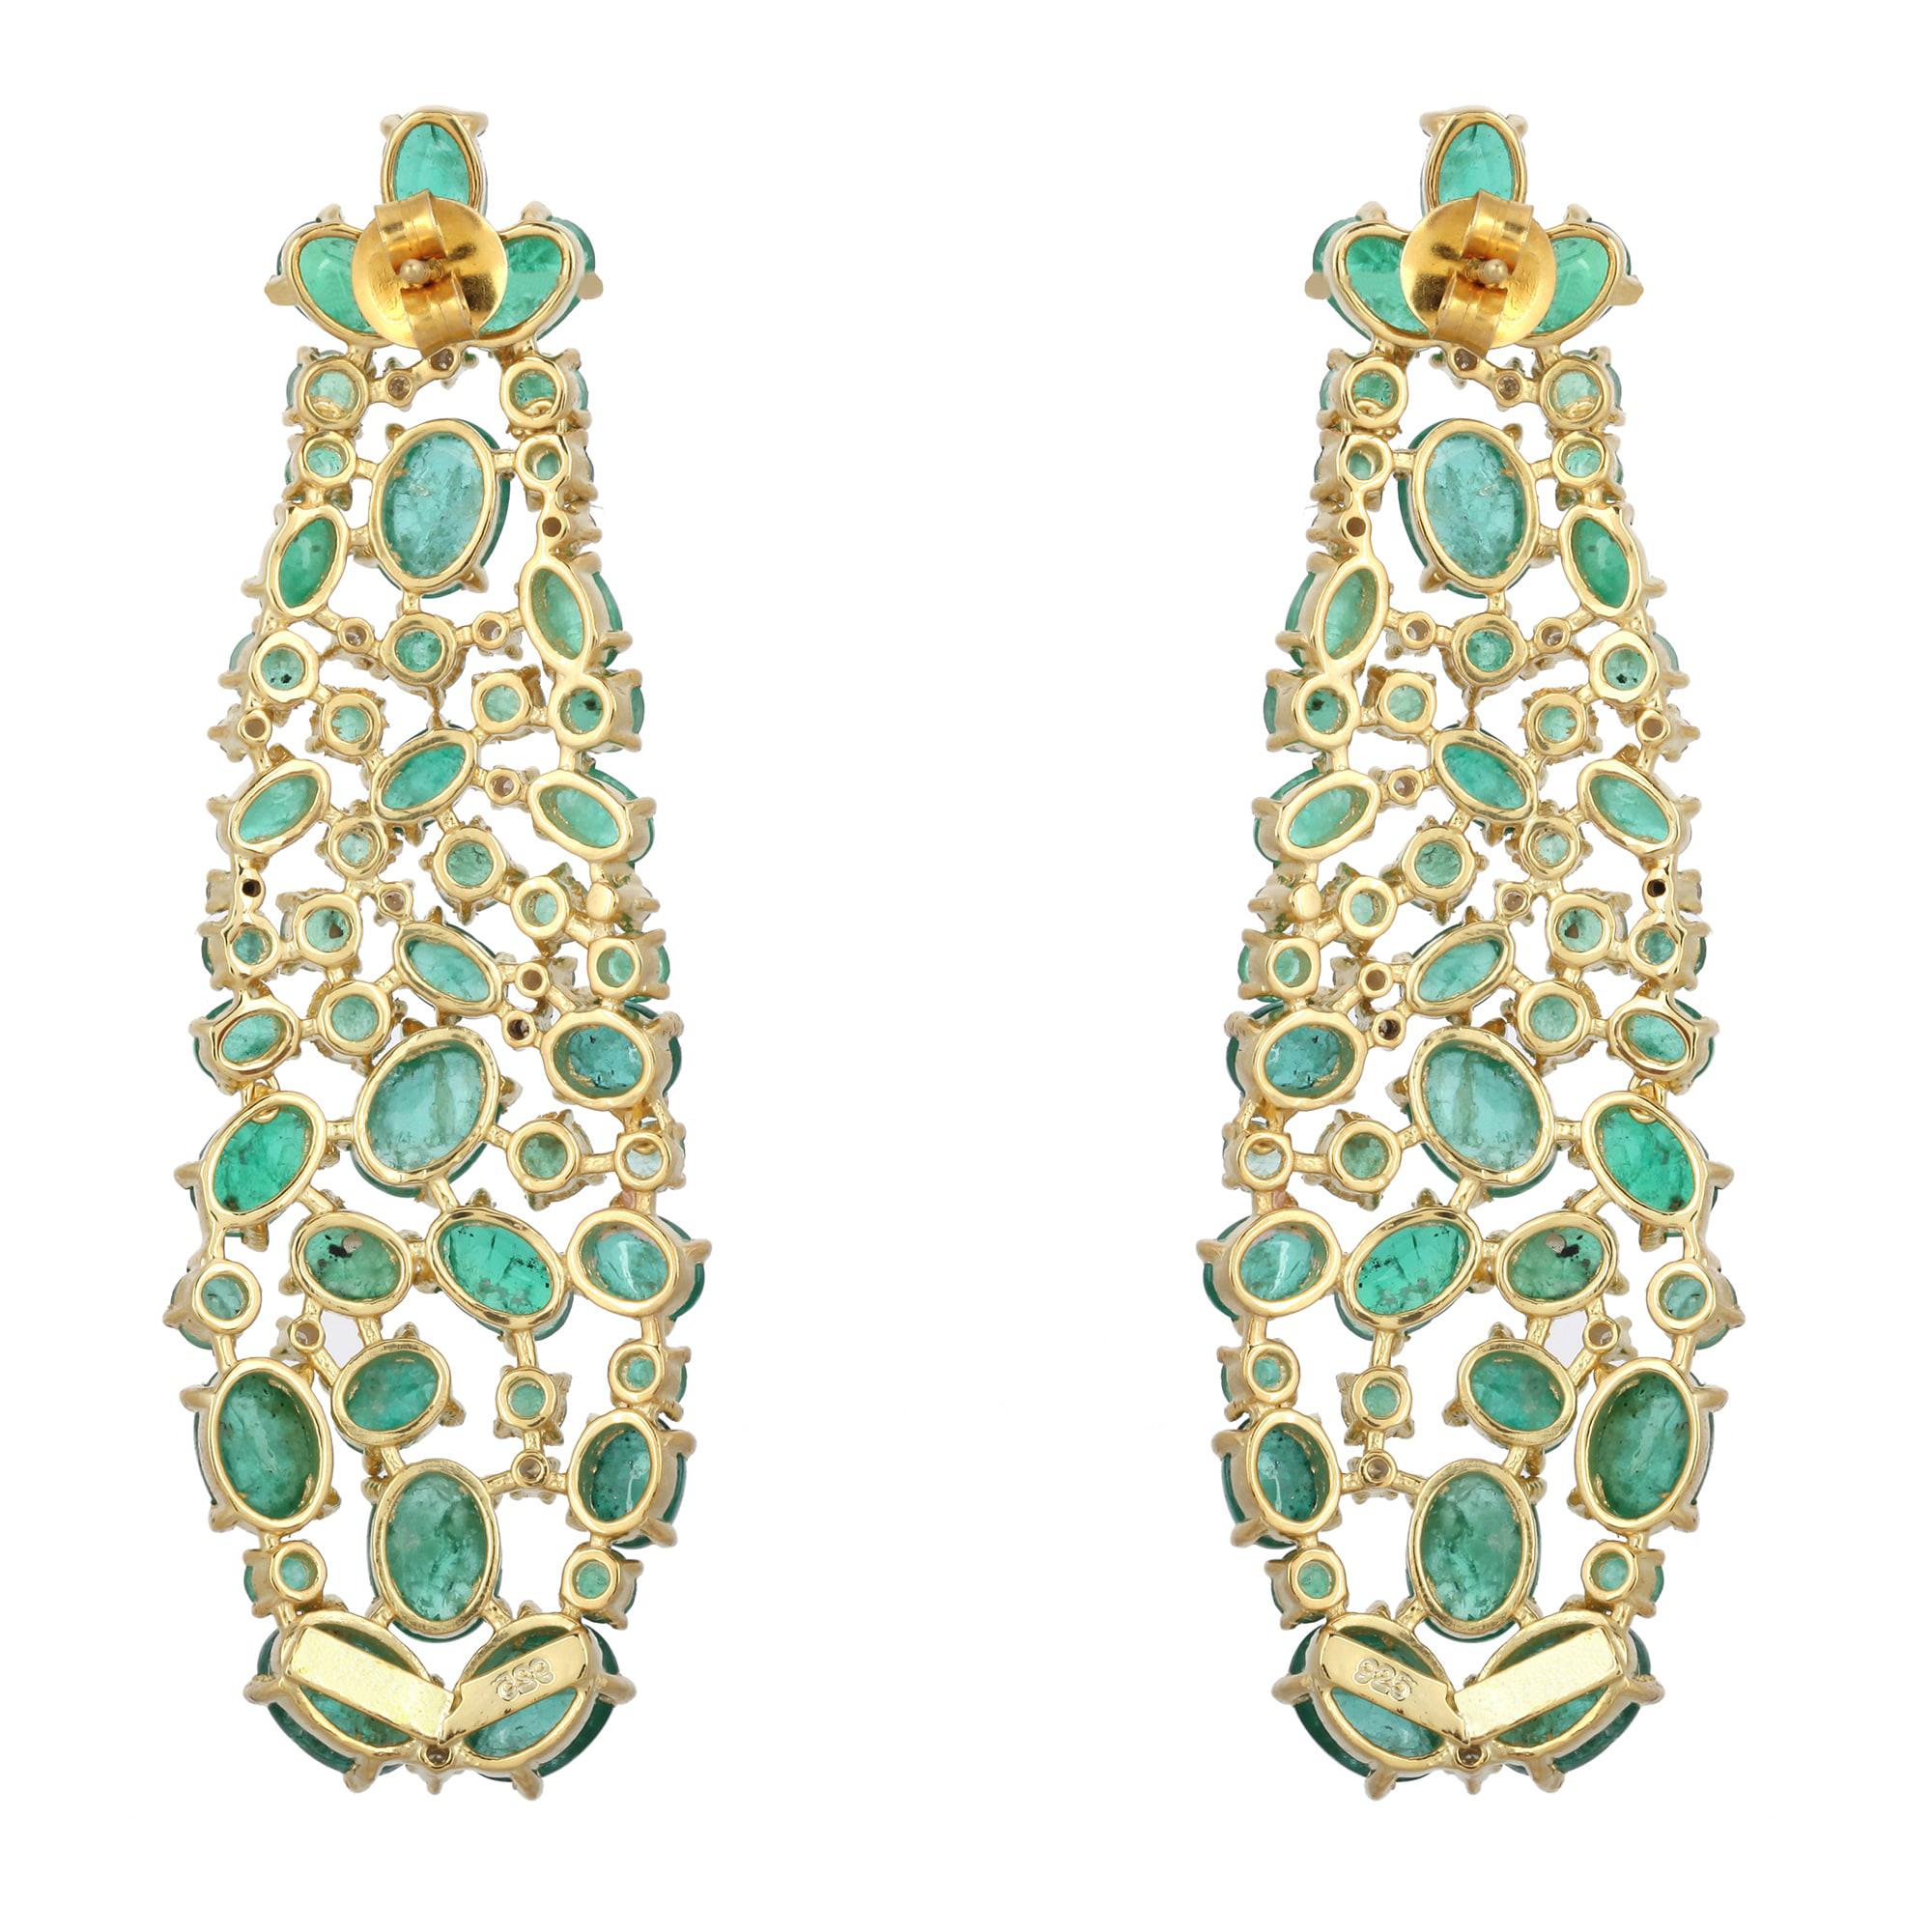 These stunning earrings are thoughtfully and meticulously crafted in 18-karat gold and sterling silver. It is set in 28.06 carats emerald and .38 carats of glimmering diamonds. See other pieces in fluid collection.

FOLLOW  MEGHNA JEWELS storefront